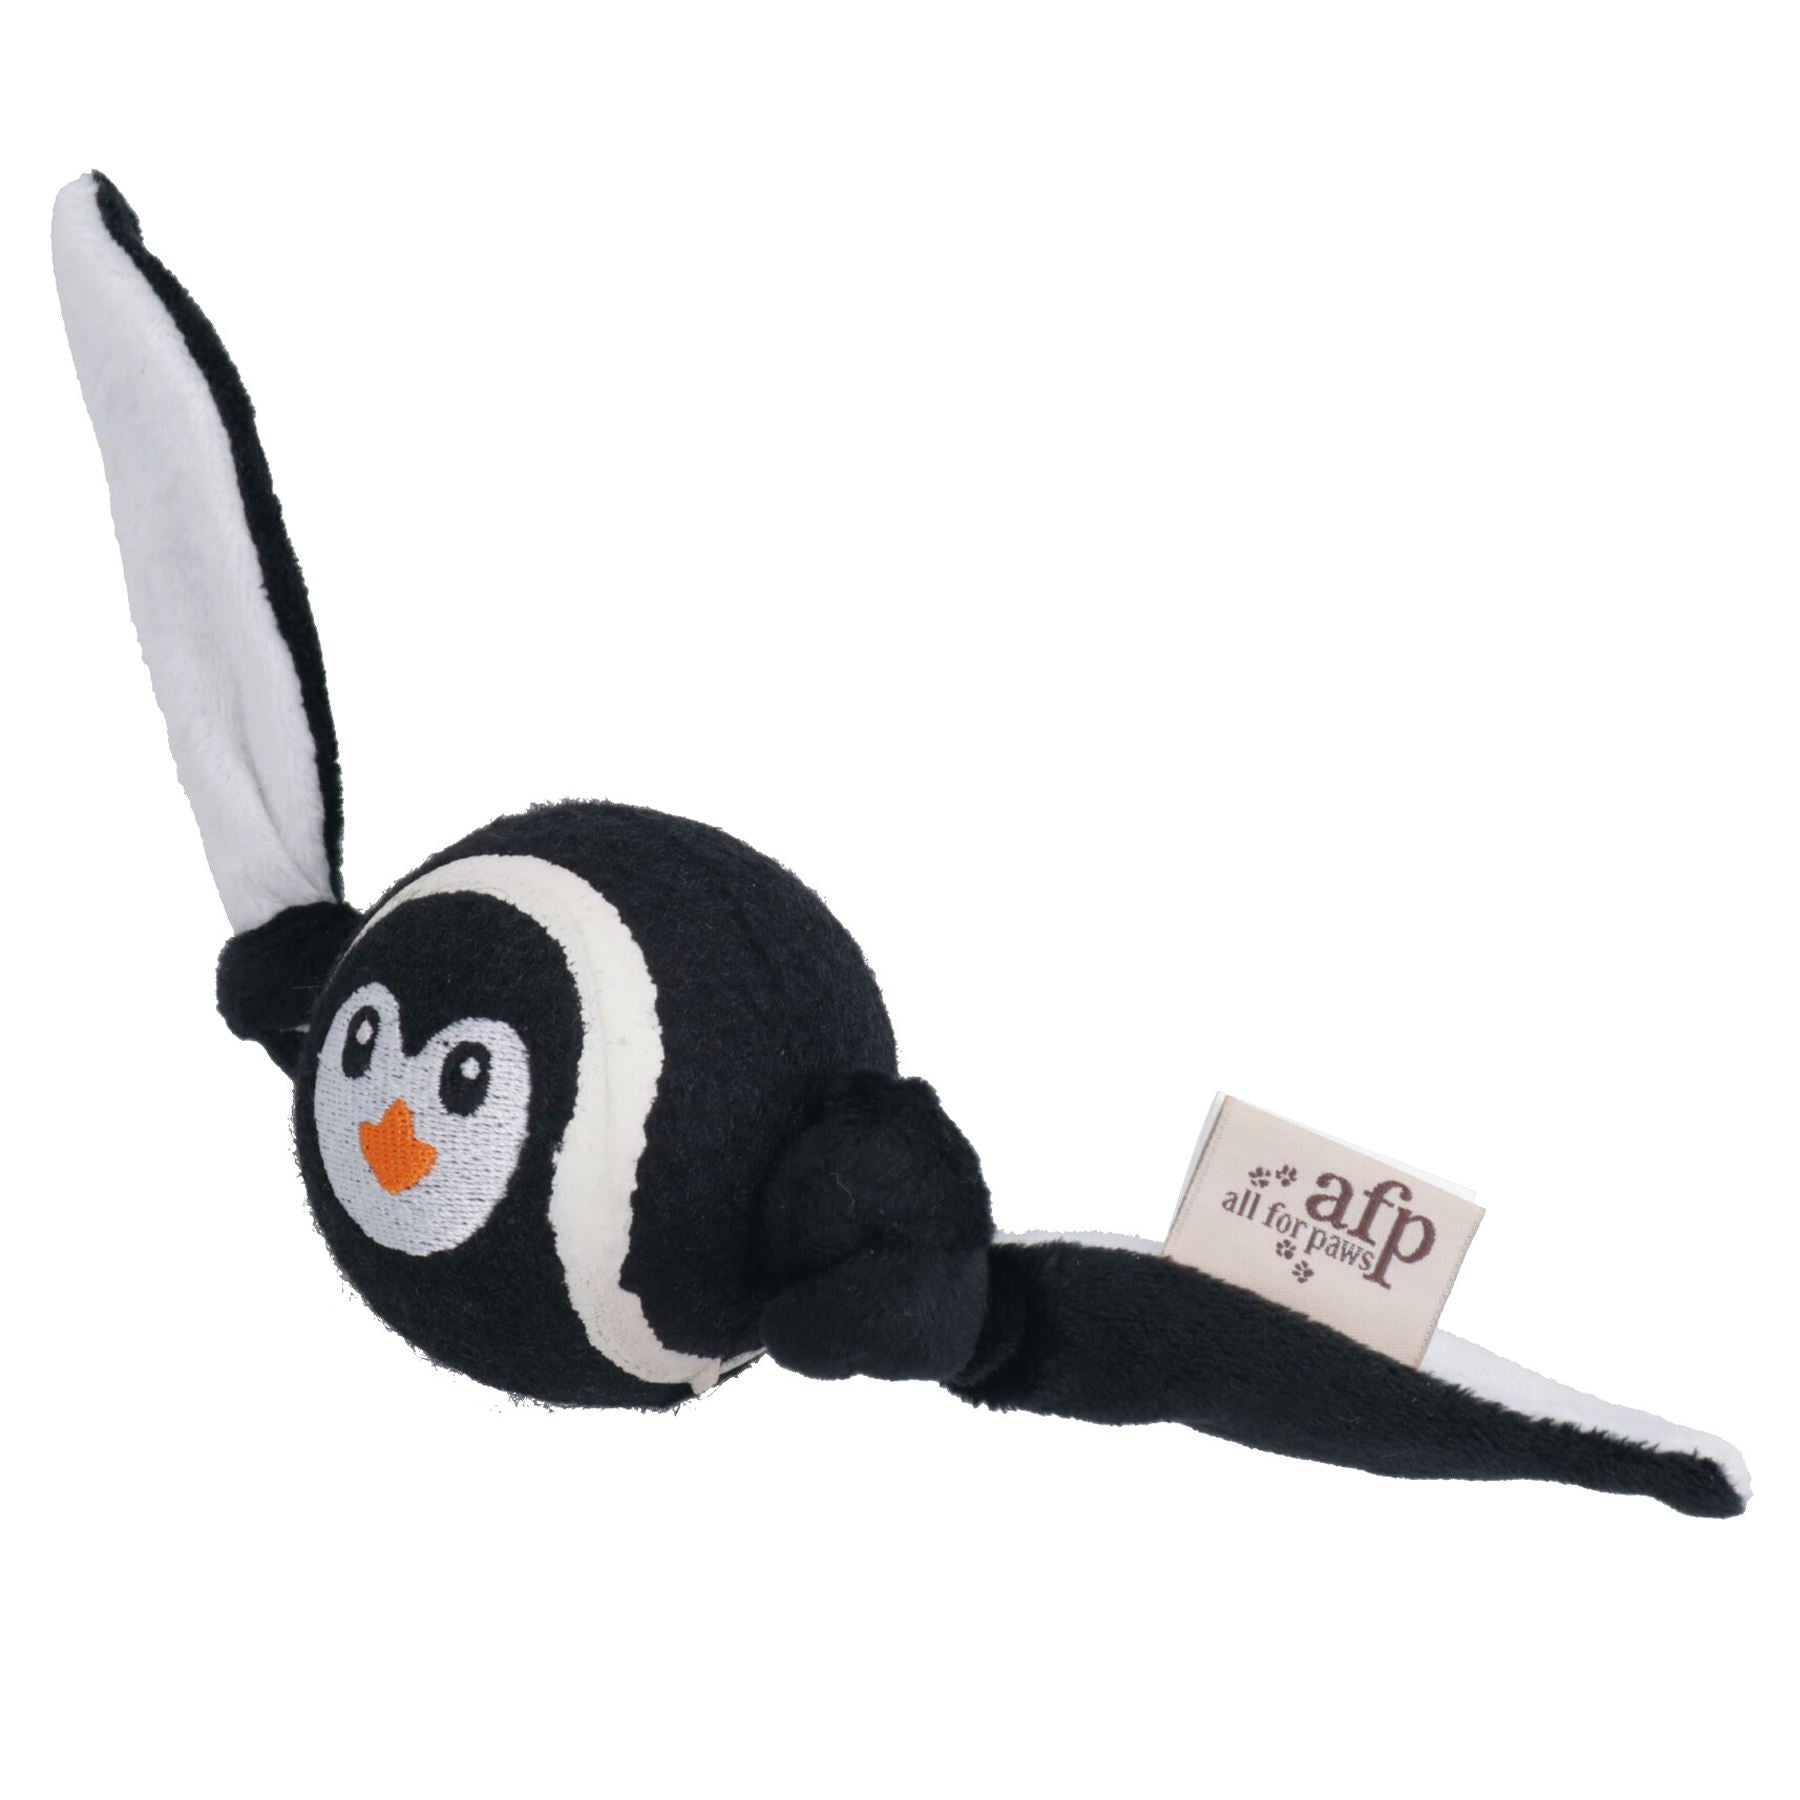 1 Medium Meta Penguin Dog Ball With Crinkle Wings Fetch Play Time Dog Gift